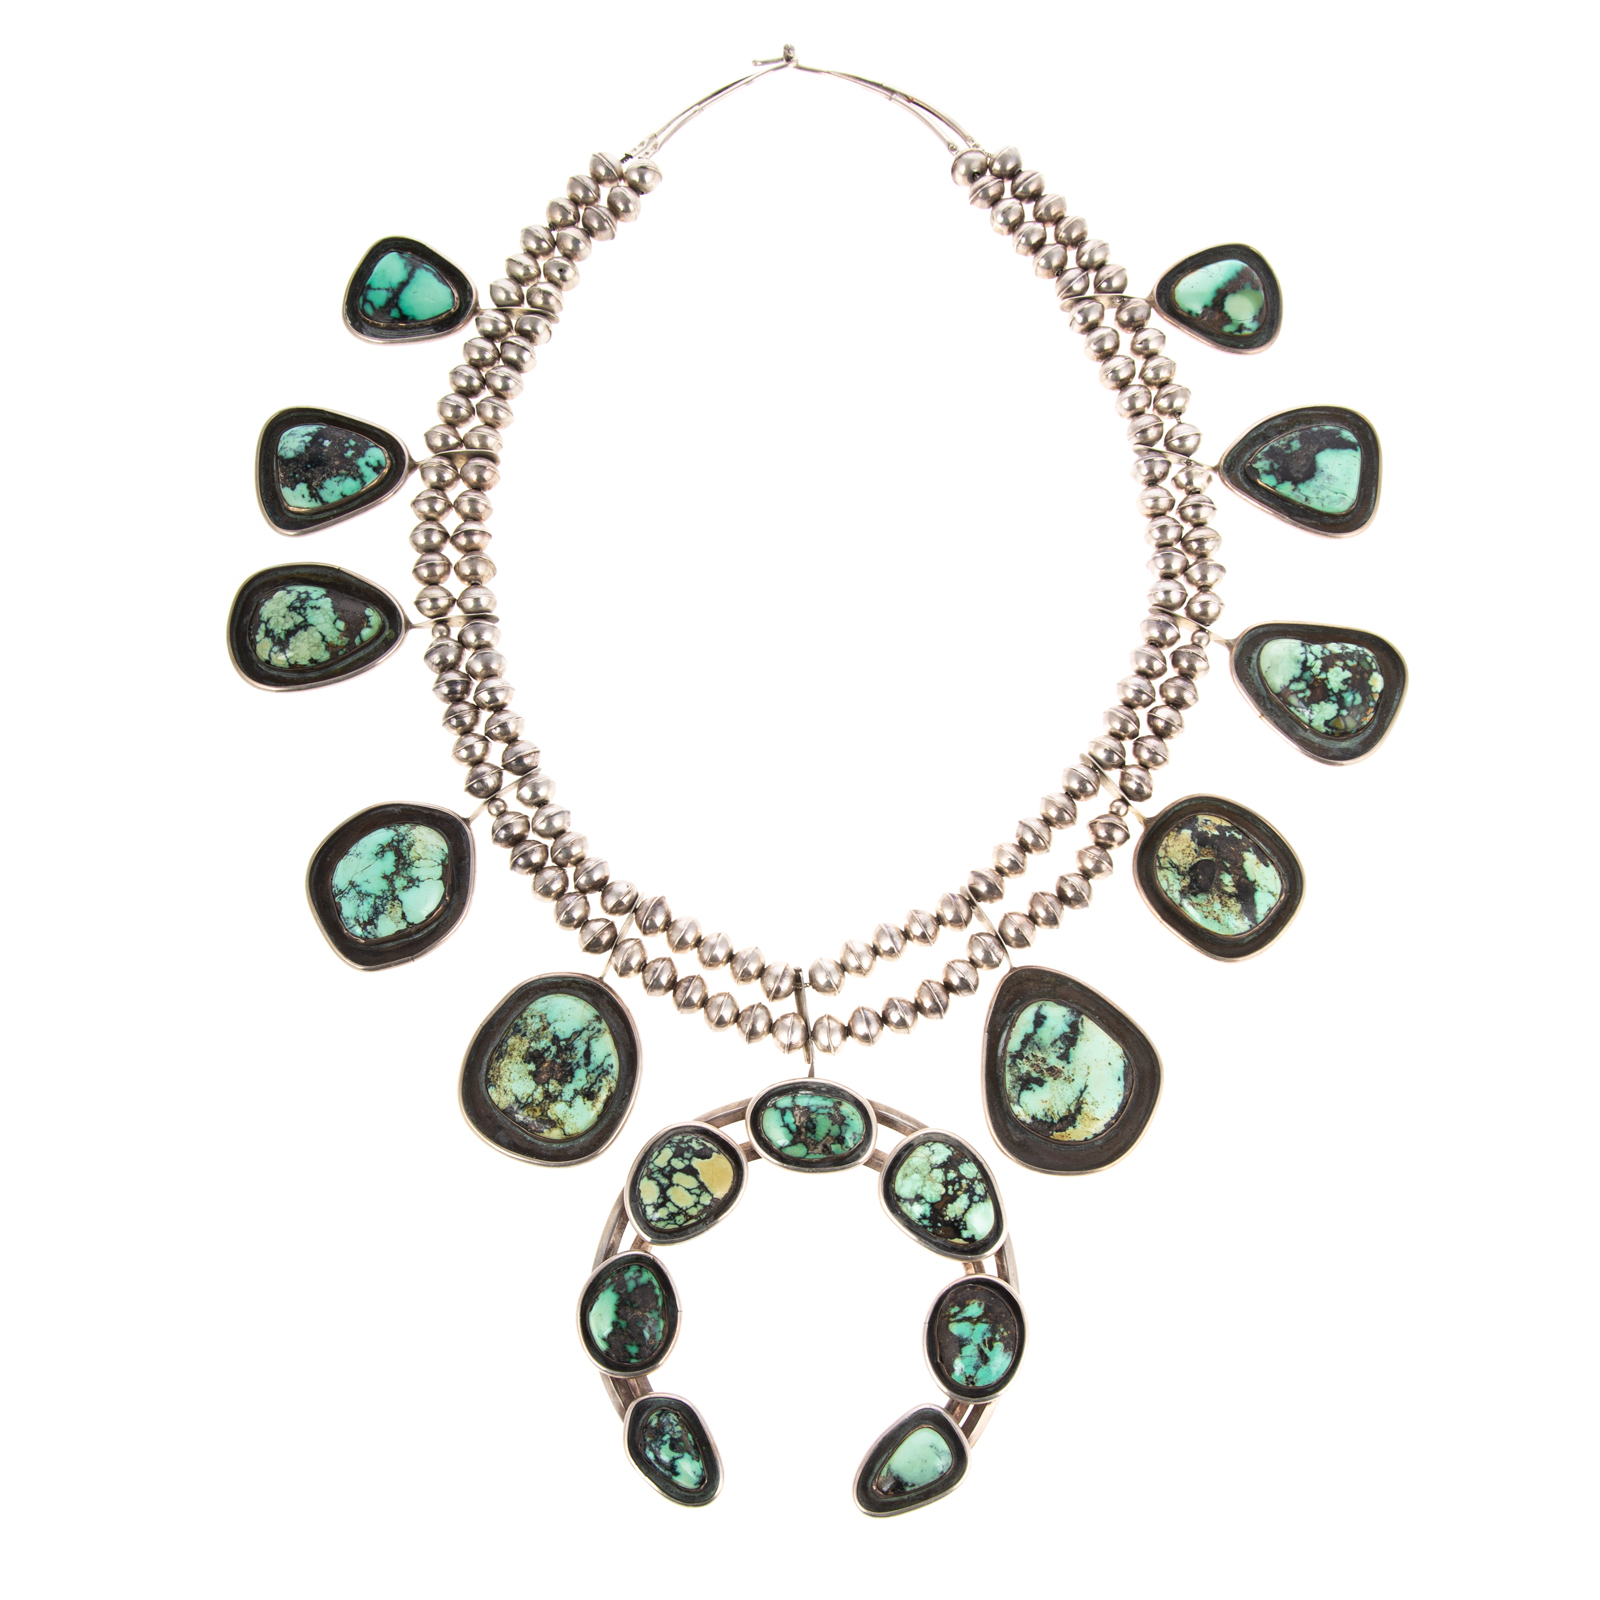 A NAVAJO TURQUOISE SQUASH BLOSSOM NECKLACE